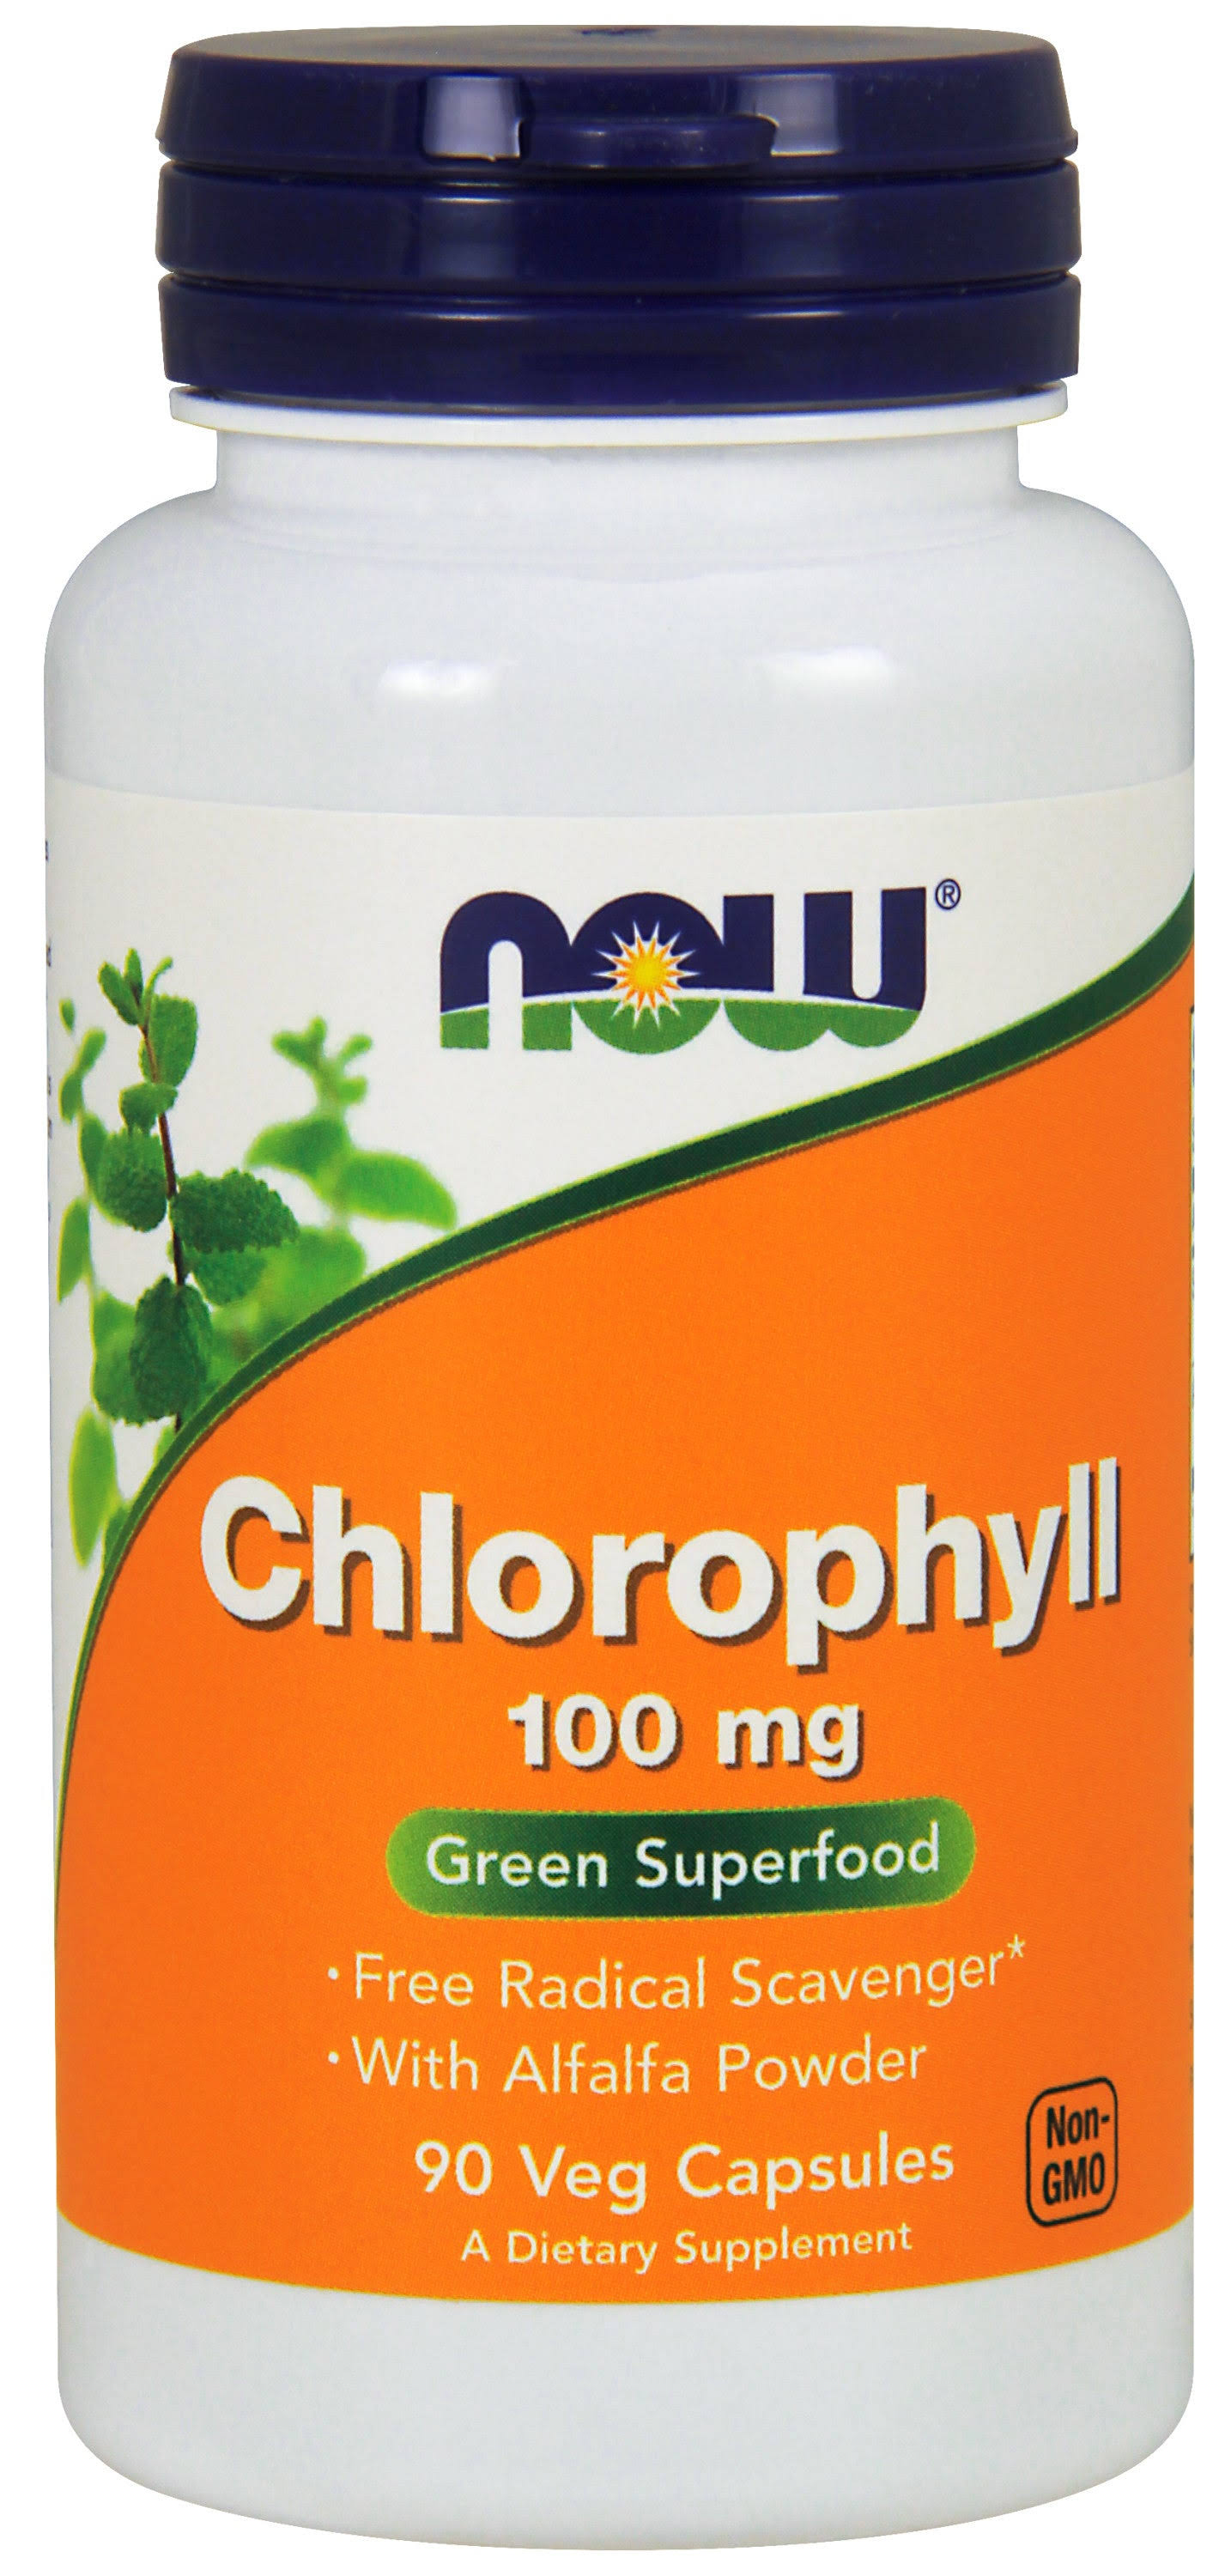 Now Foods Chlorophyll Supplement - 90 Capsules